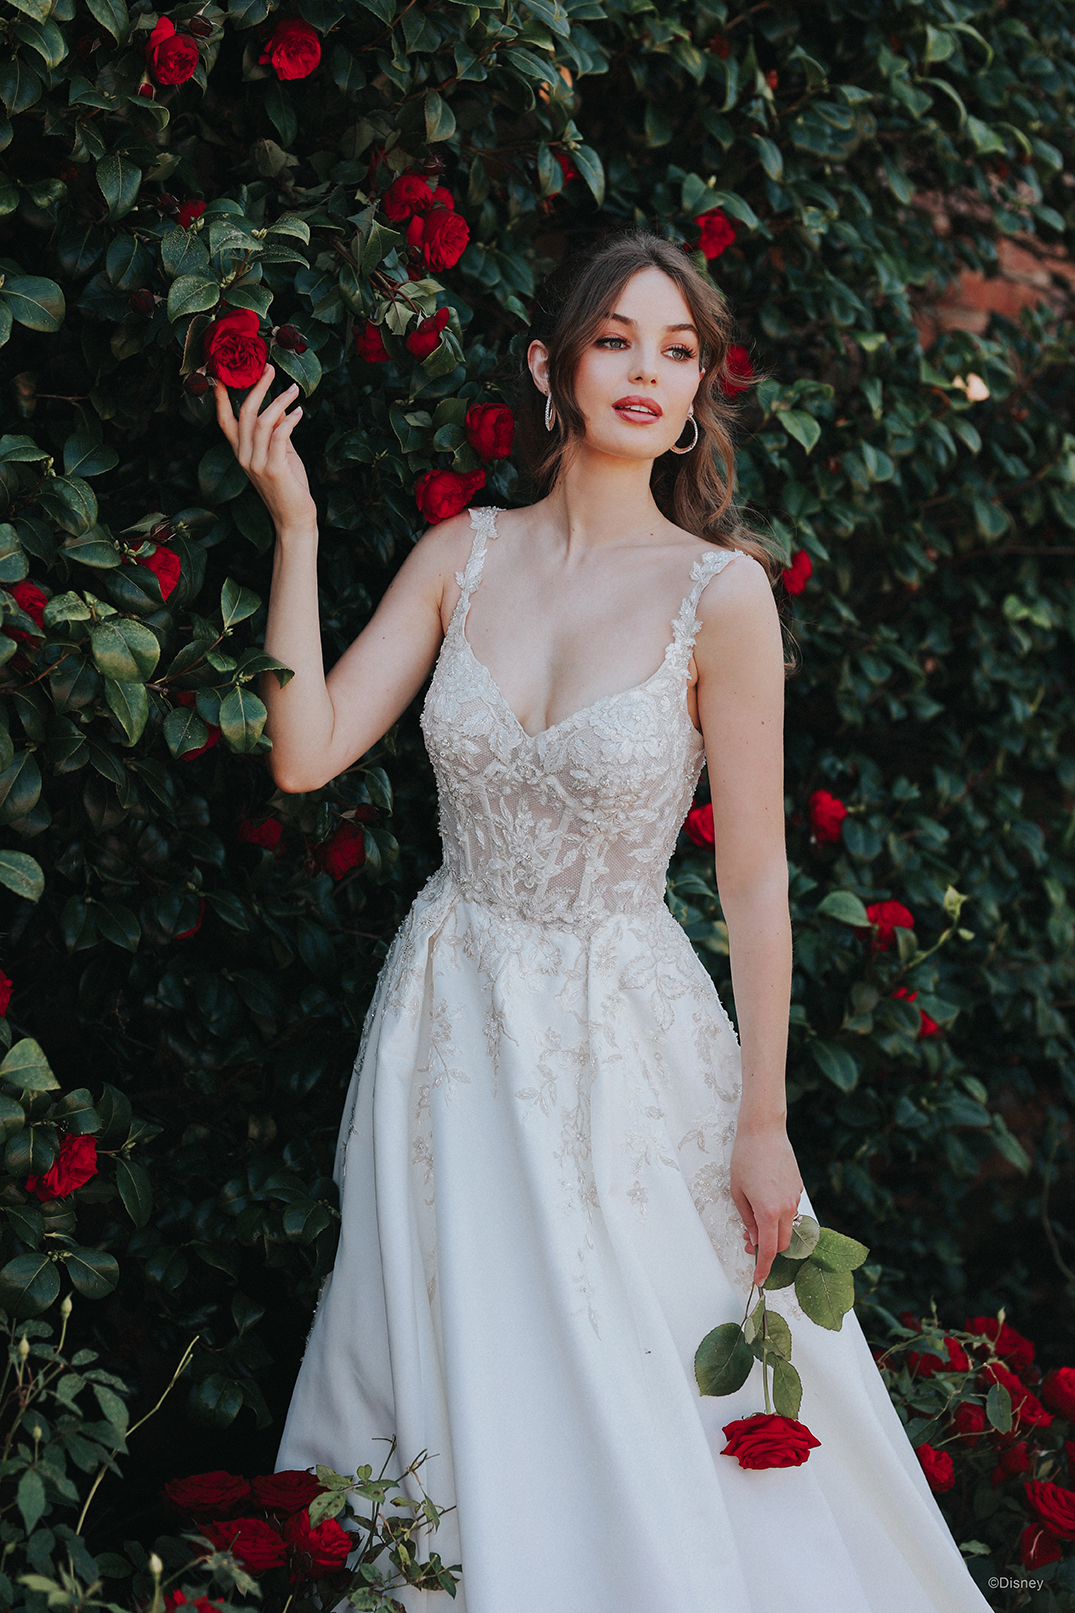 An ethereal, romantic gown with a sparkling illusion lace bodice leading to  a light, soft A-line tulle and chiffon skirt featuring a high